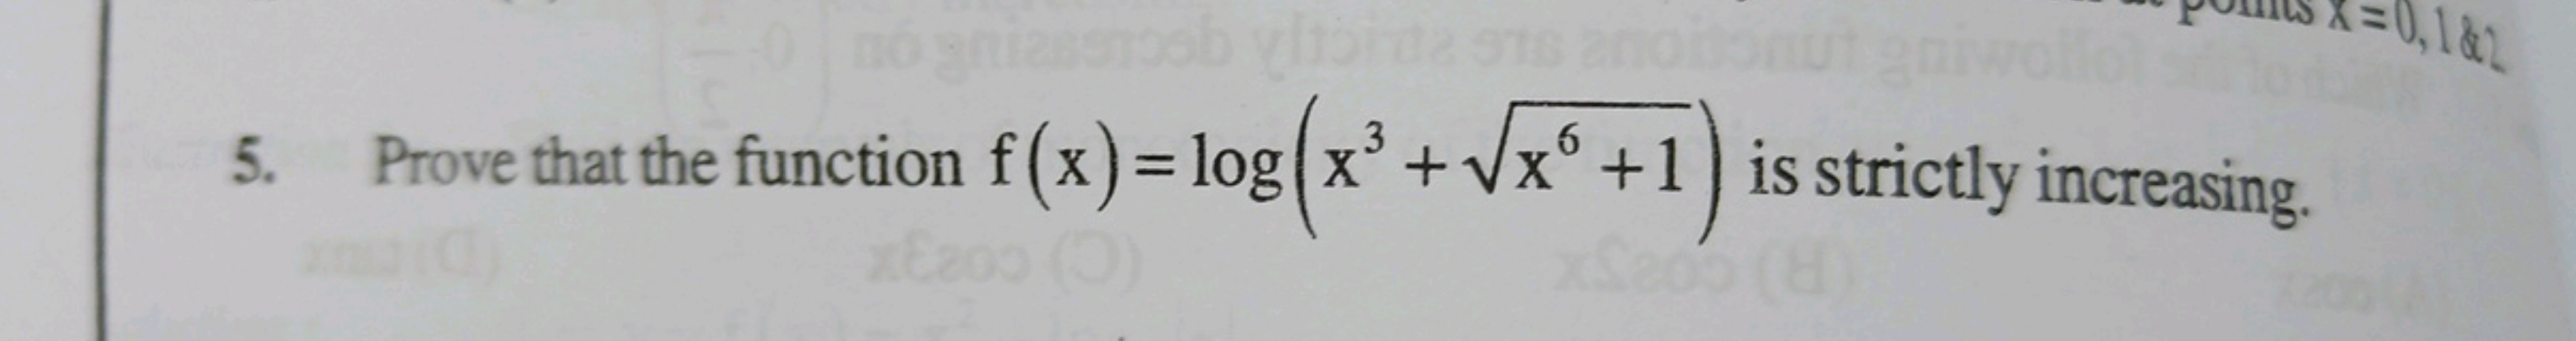 5. Prove that the function f(x)=log(x3+x6+1​) is strictly increasing.
